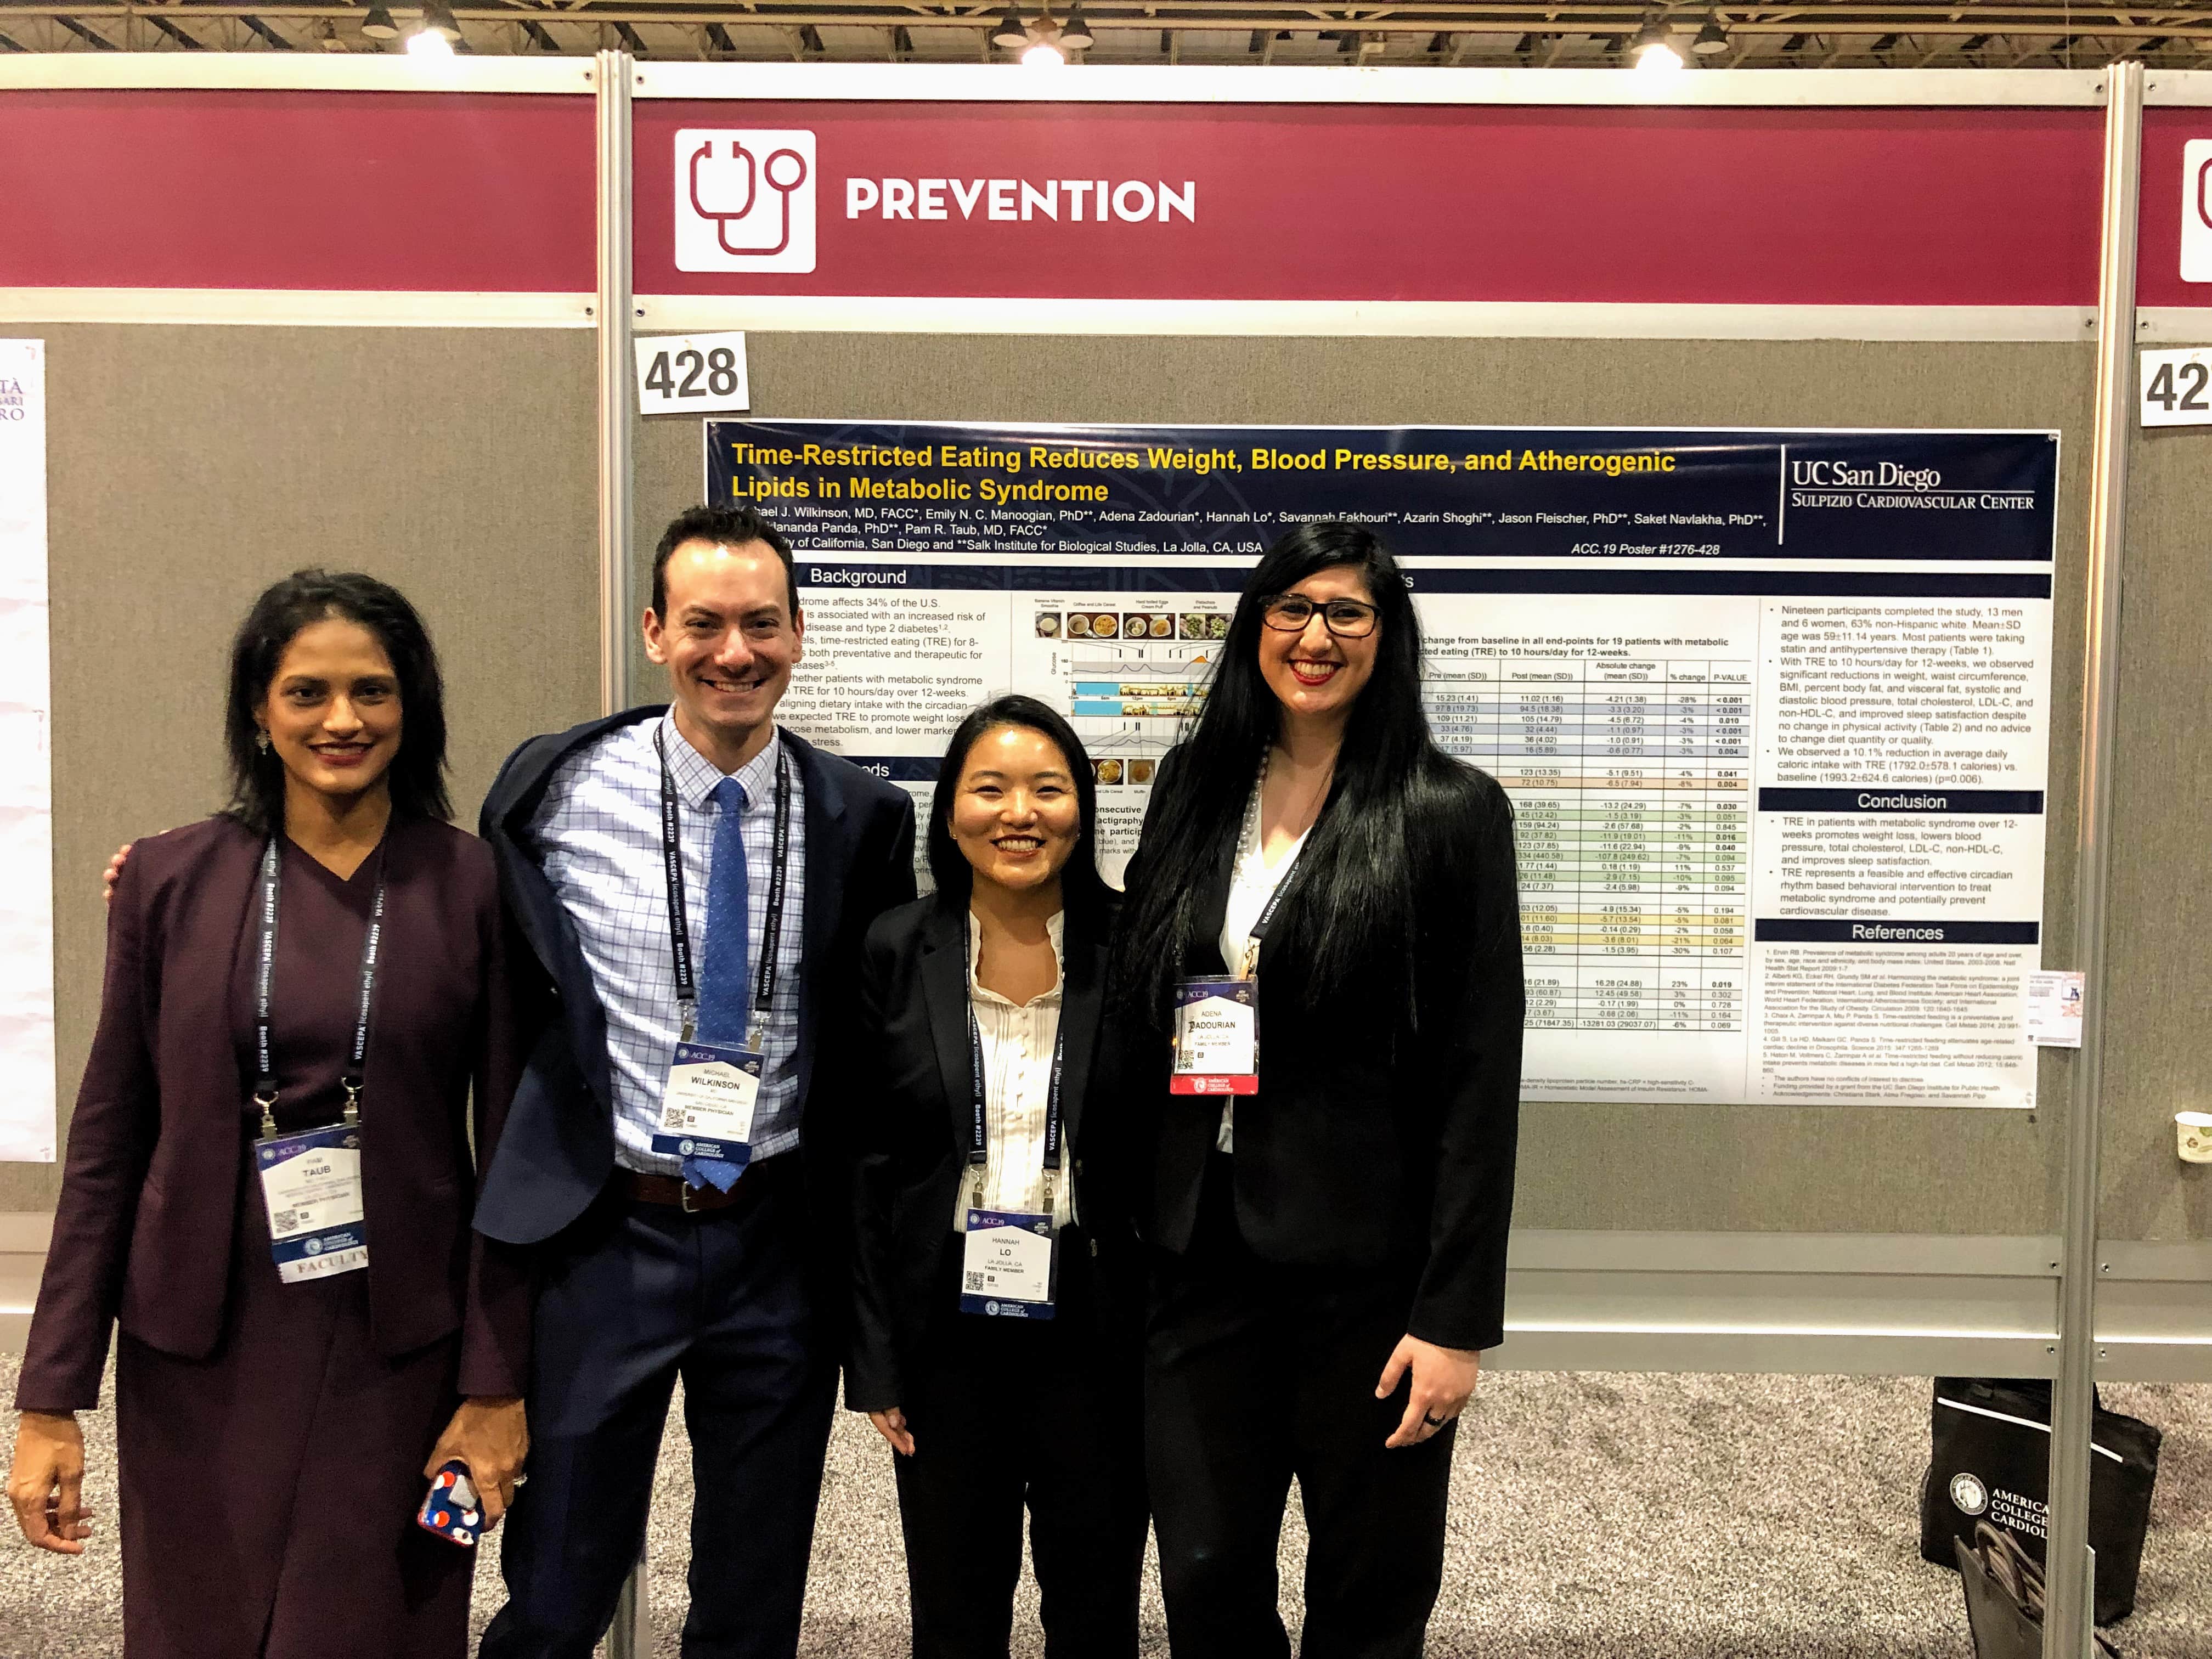 Poster on Time-Restricted Eating presented at the American College of Cardiology Annual Meeting, March 2019